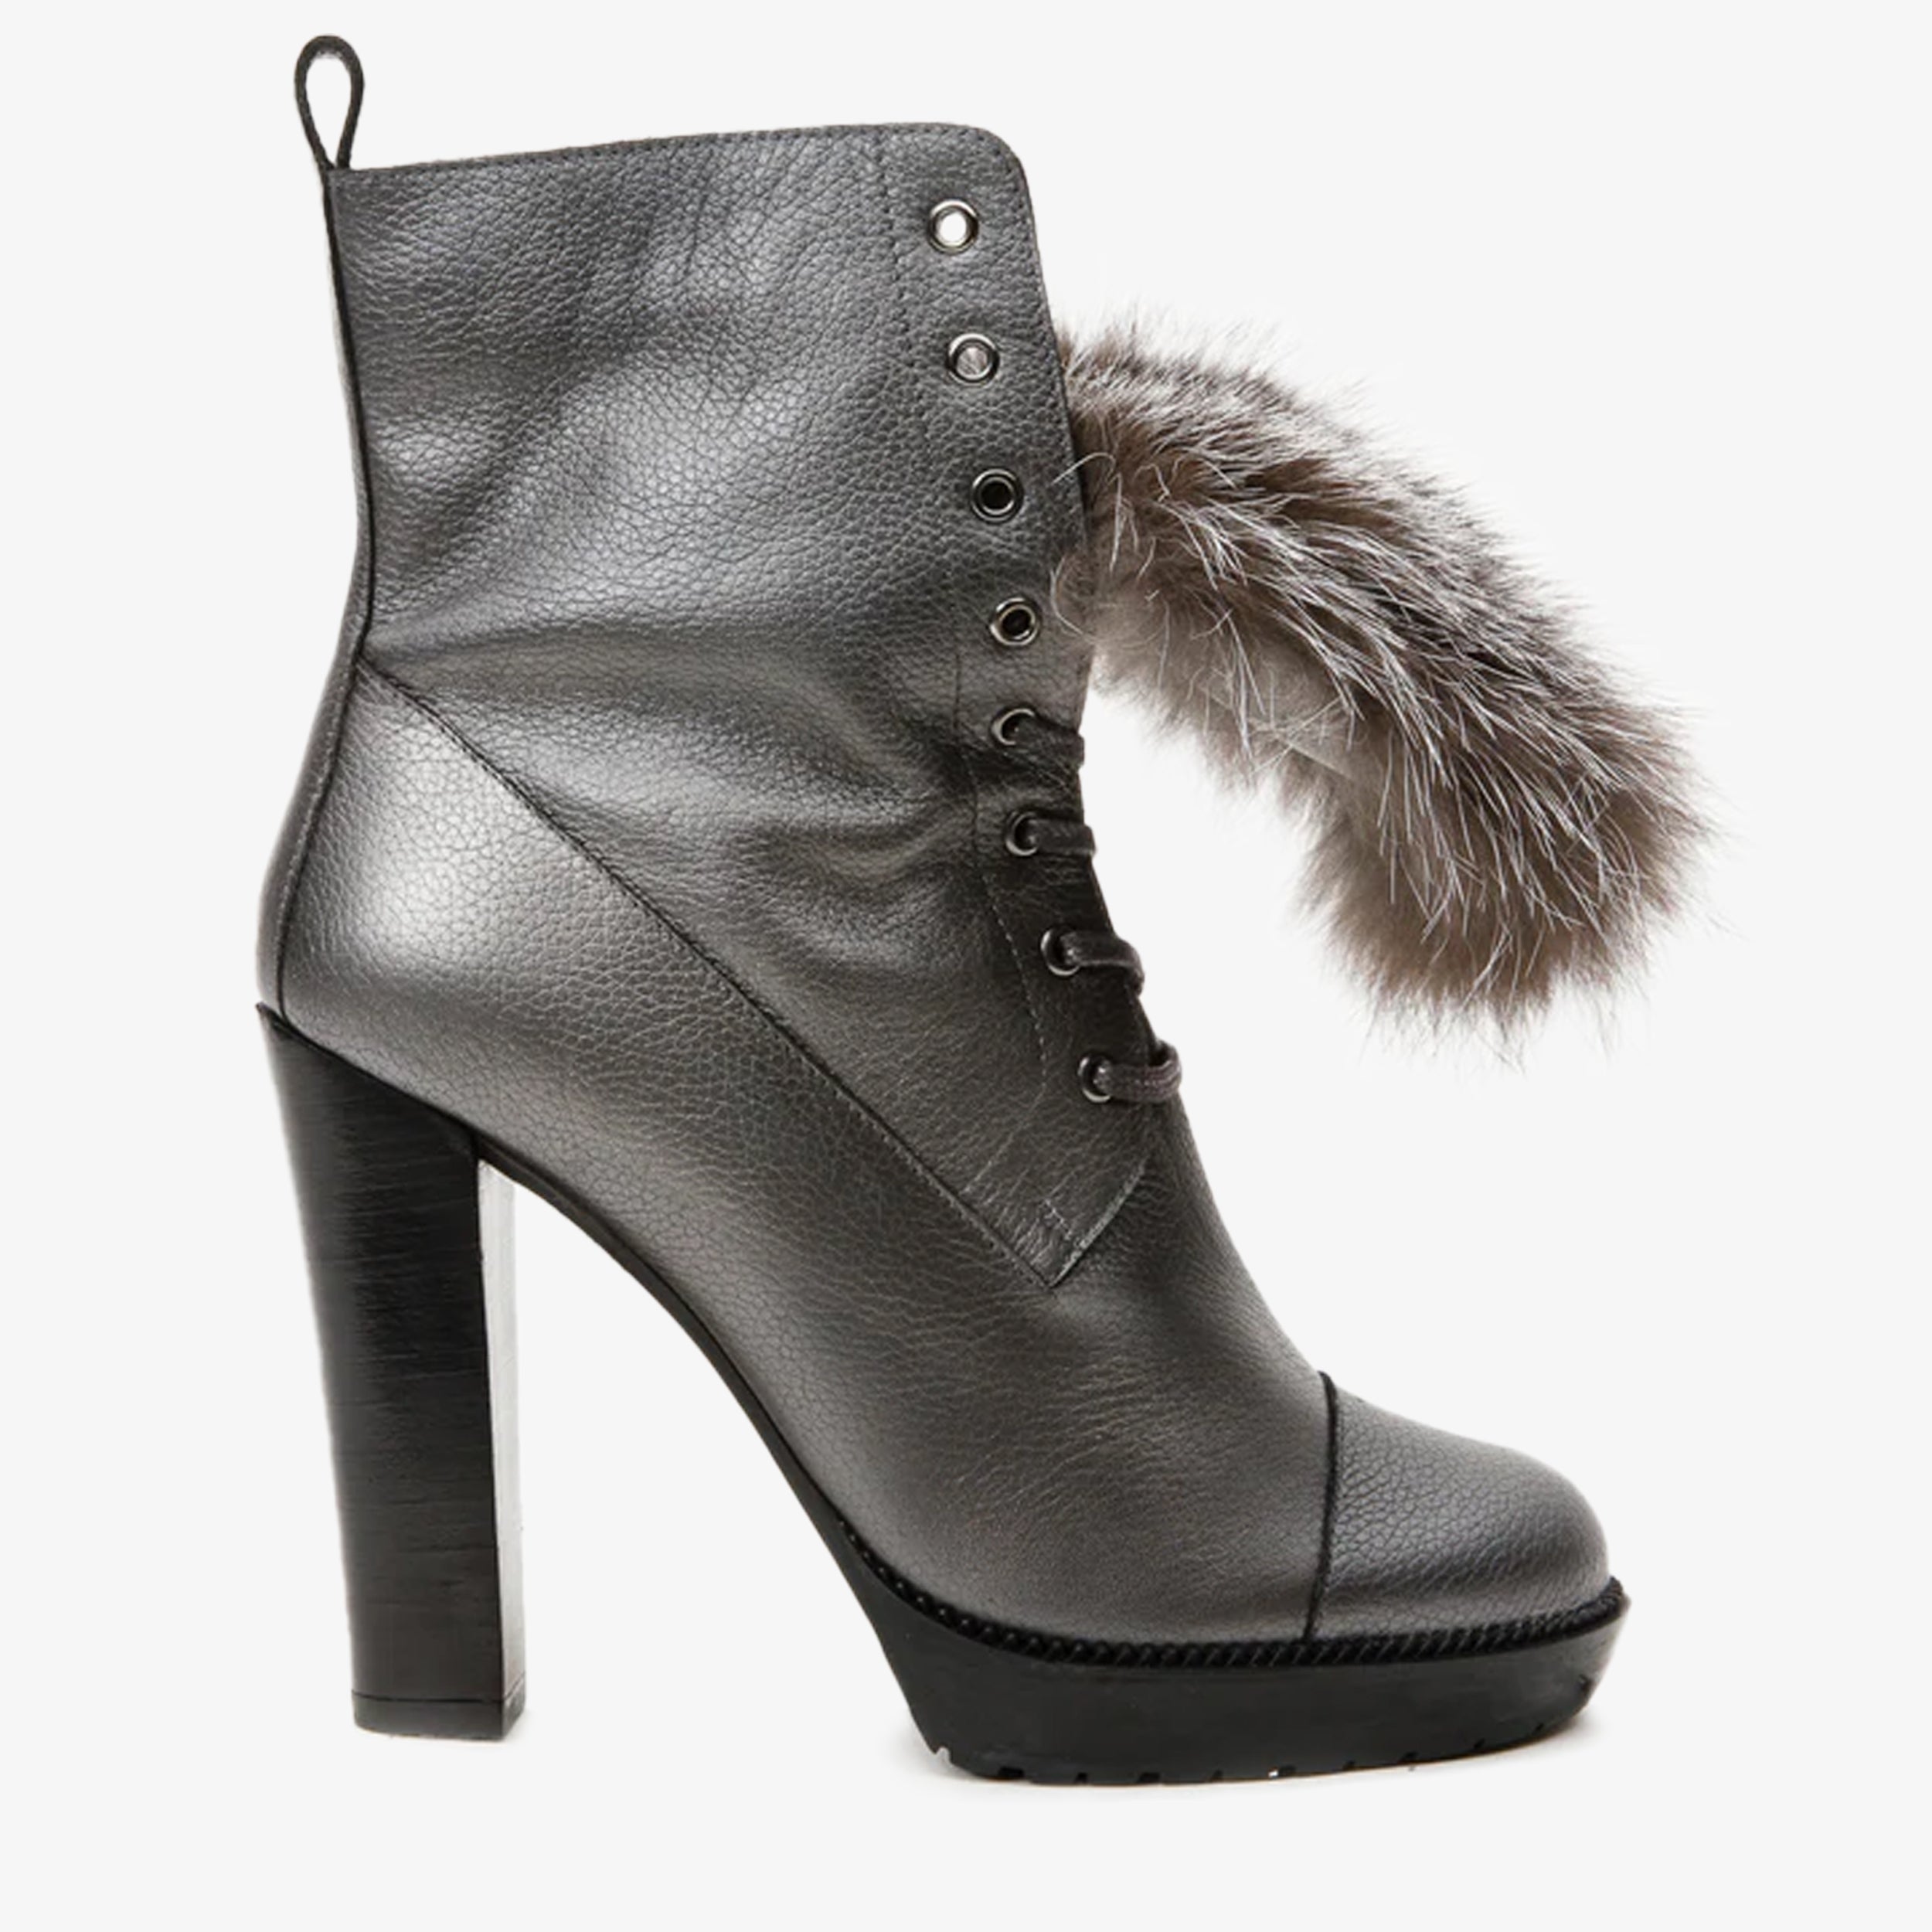 Susanny High Heel Boots for Women,Womens Platform Colombia | Ubuy